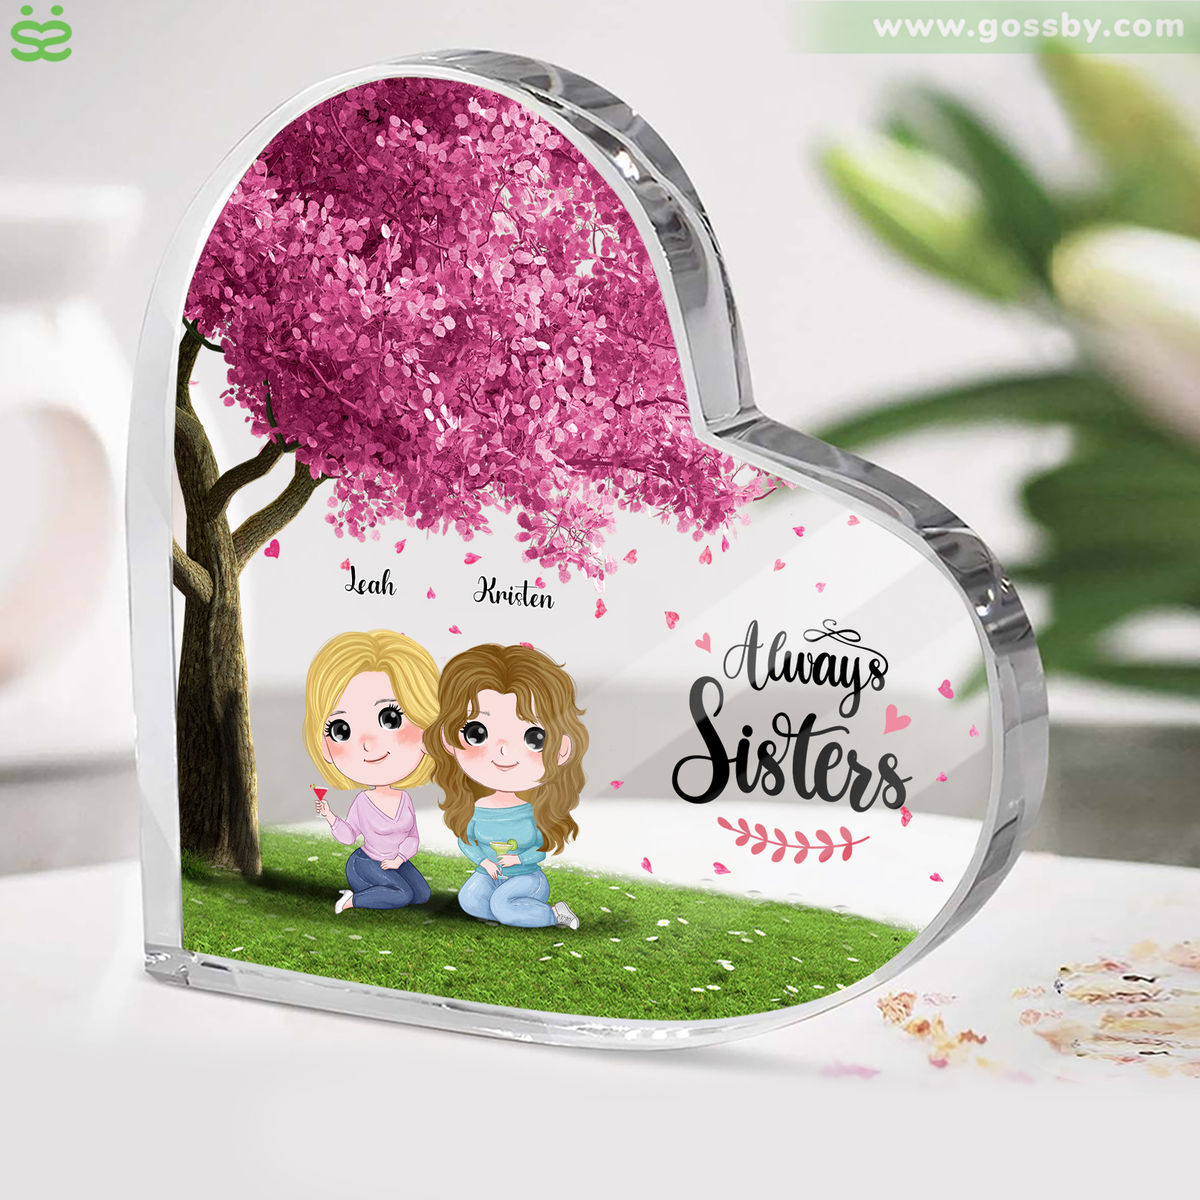 Personalized Desktop - Transparent Plaque - Sisters/ Best Friends Gifts - Chibi Girls - Always Sisters (Custom Heart-Shaped Acrylic Plaque)_1